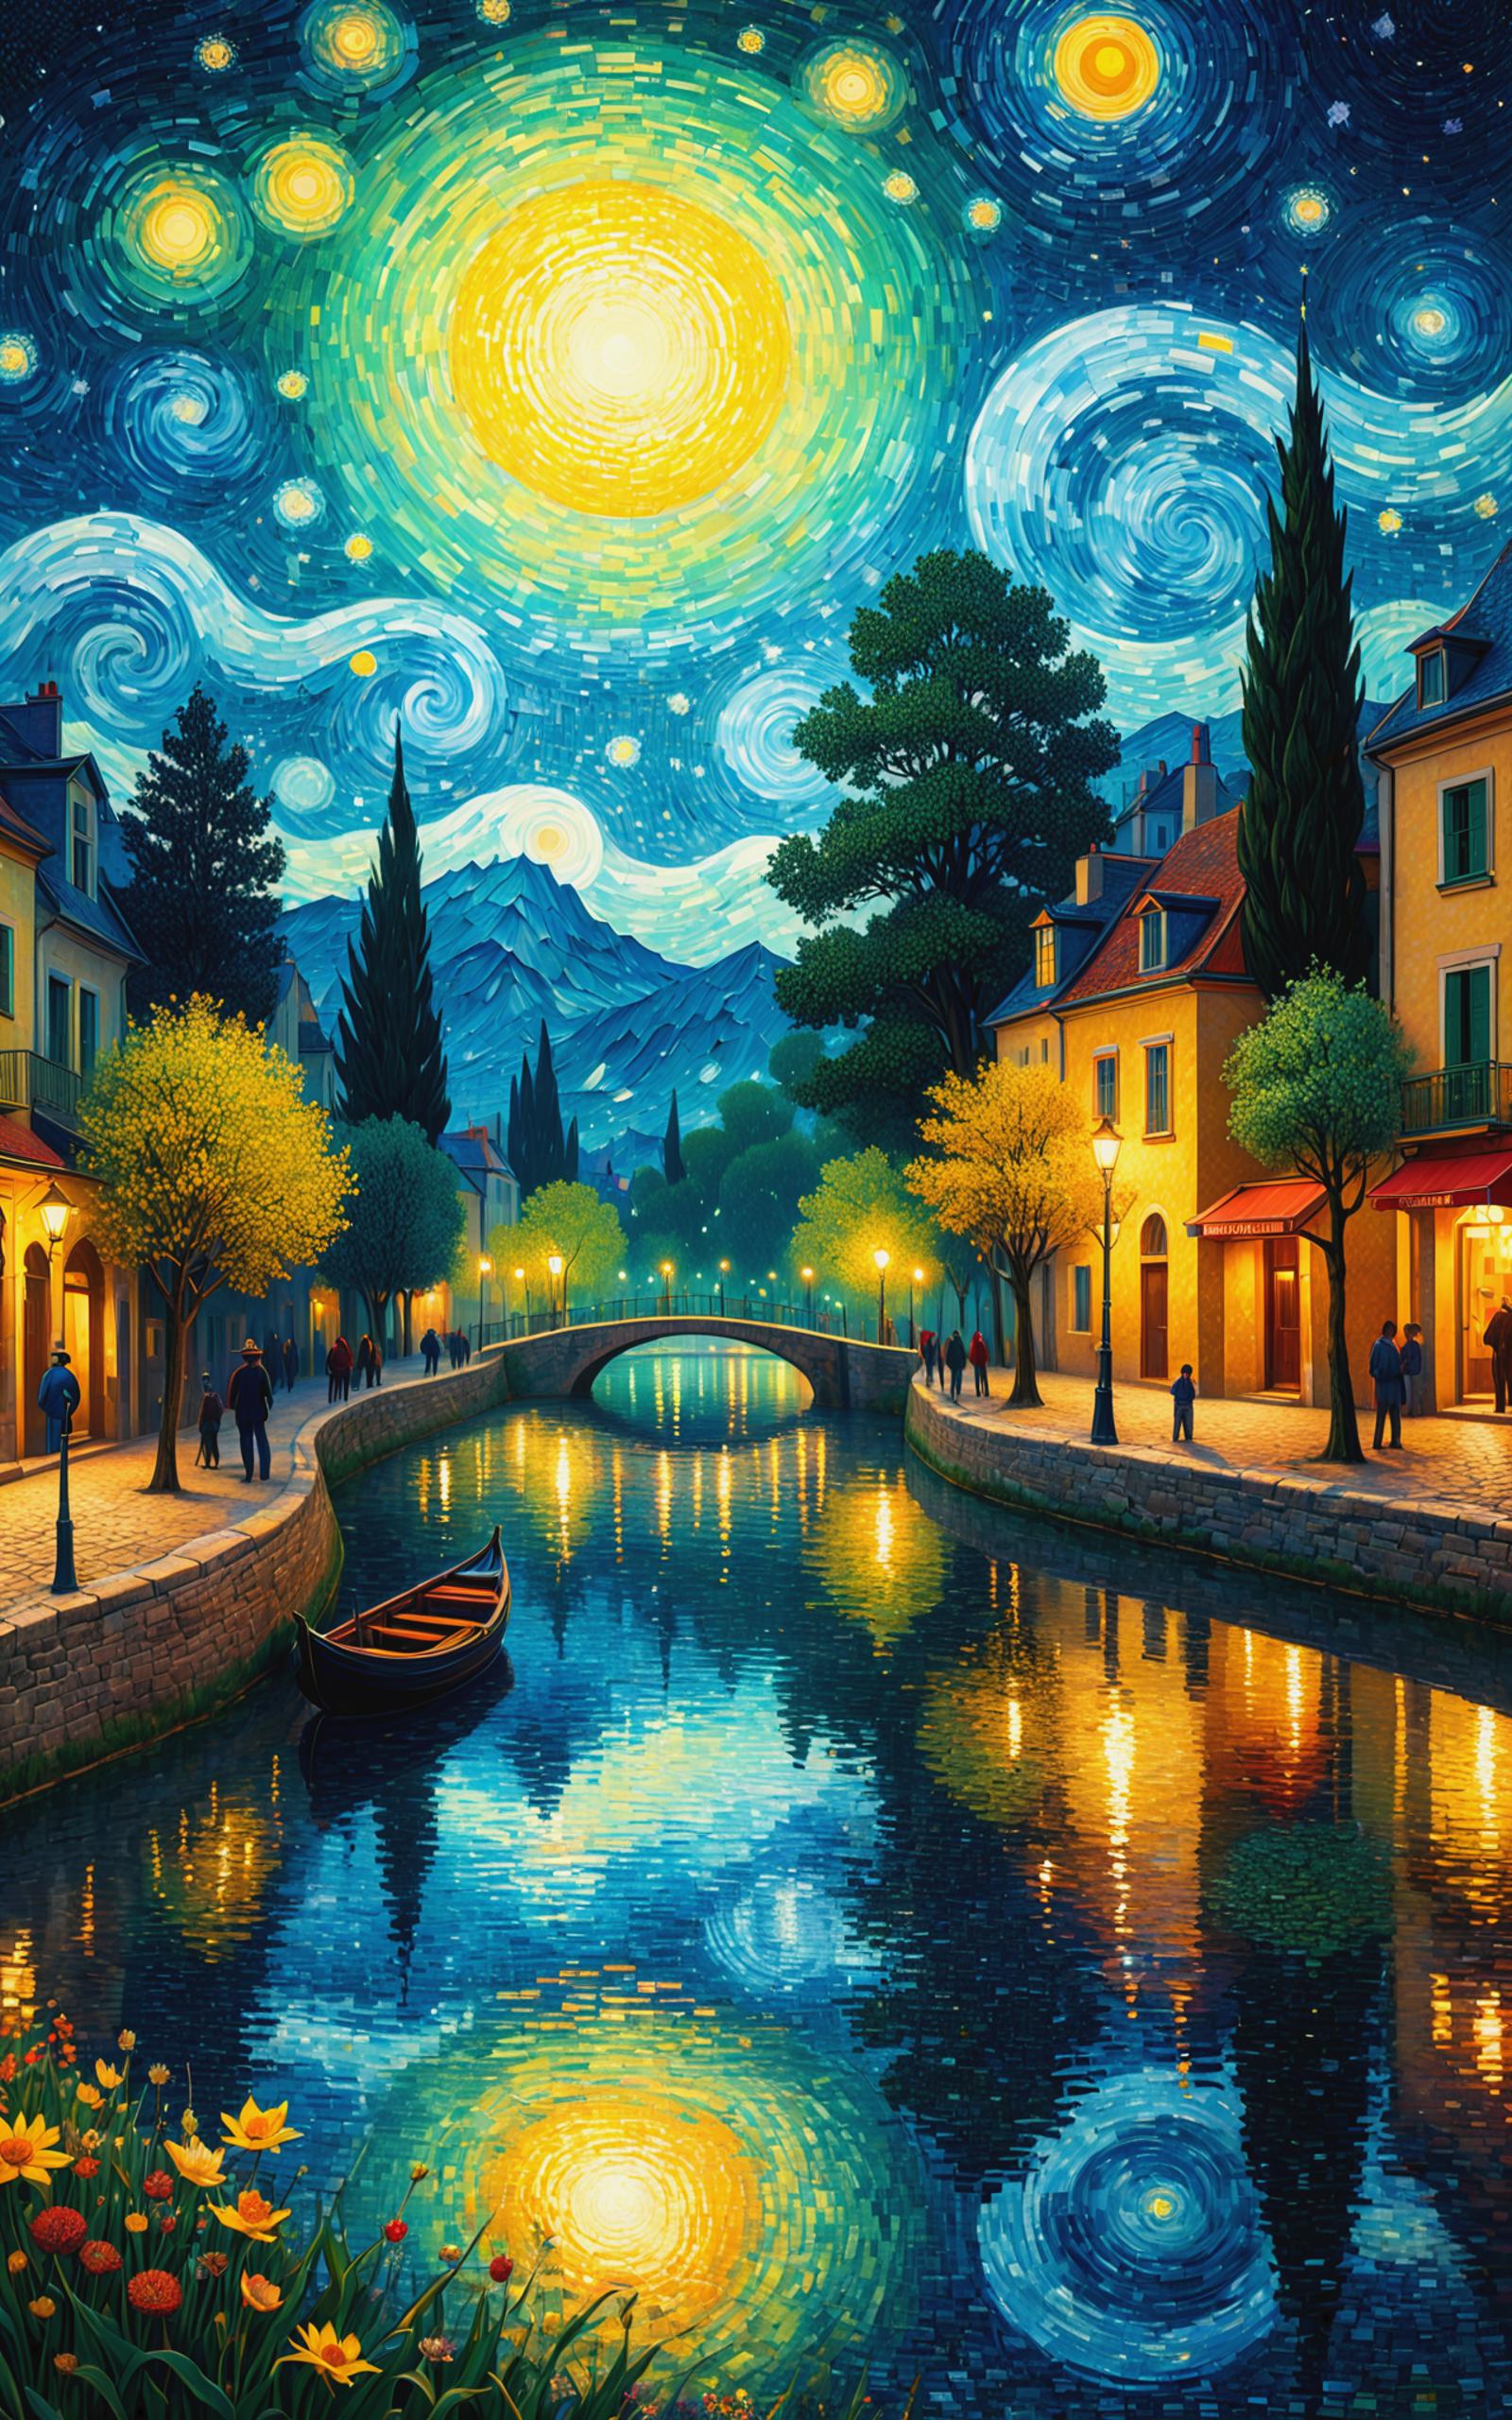 A Painted Image of a City with a Bridge and a Boat in the Water at Night